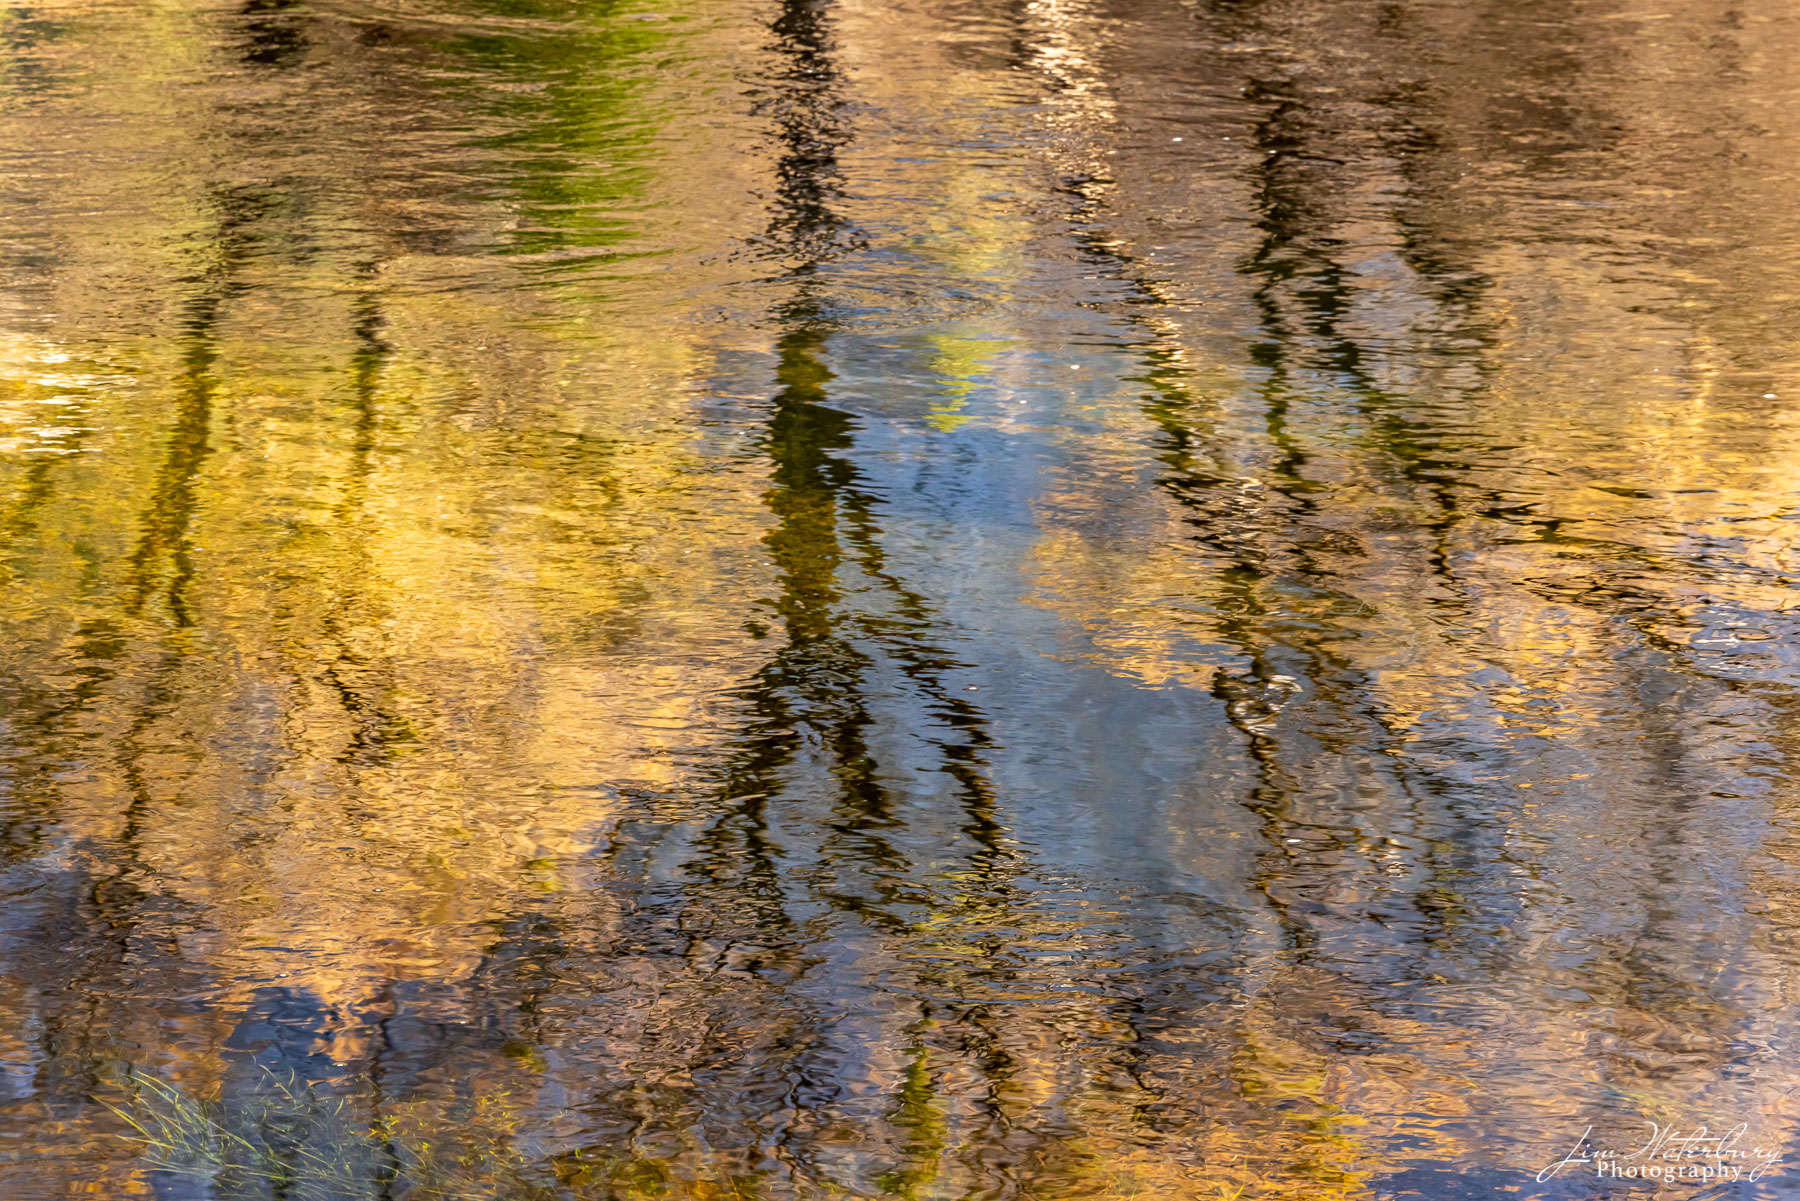 Reflection of cliffs and trees in the Merced River